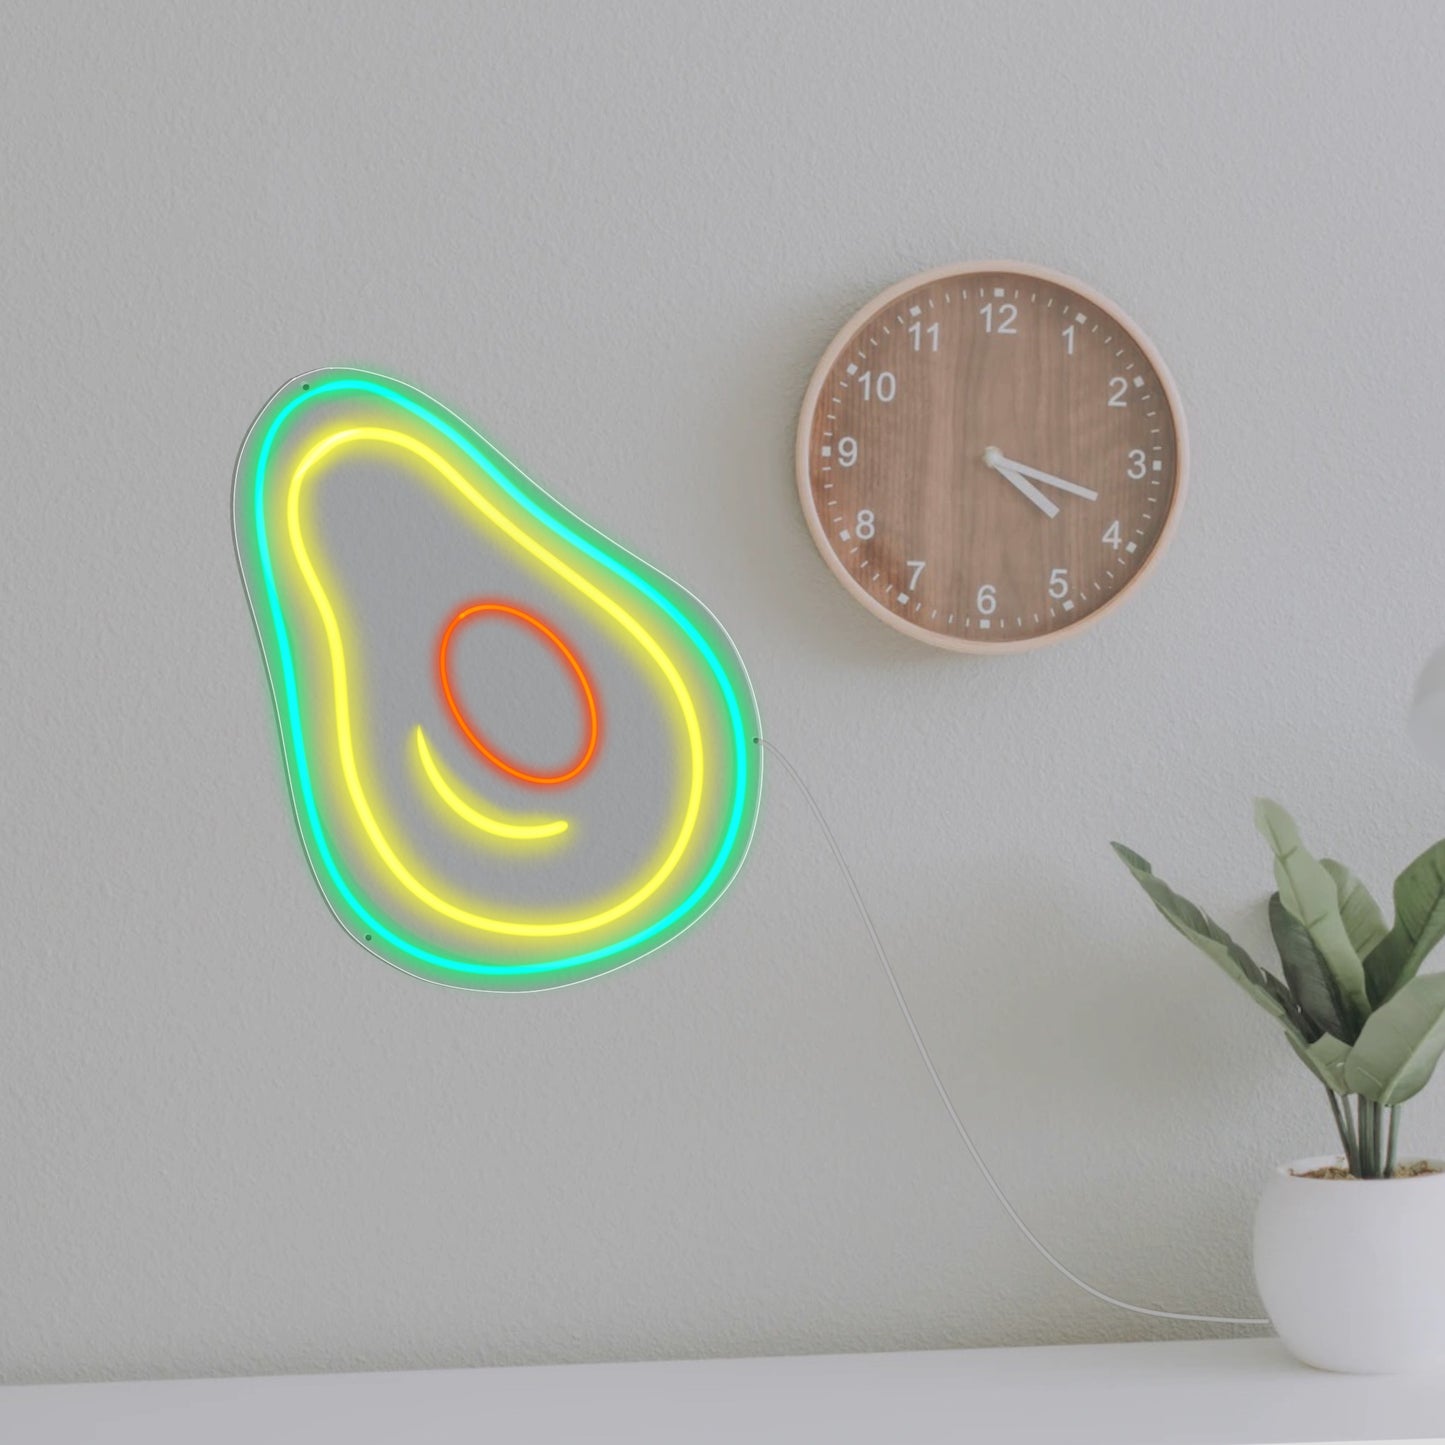 A glowing neon sign in the shape of an avocado, symbolizing Australia's love for this trendy fruit, perfect for adding a touch of Down Under charm to any space